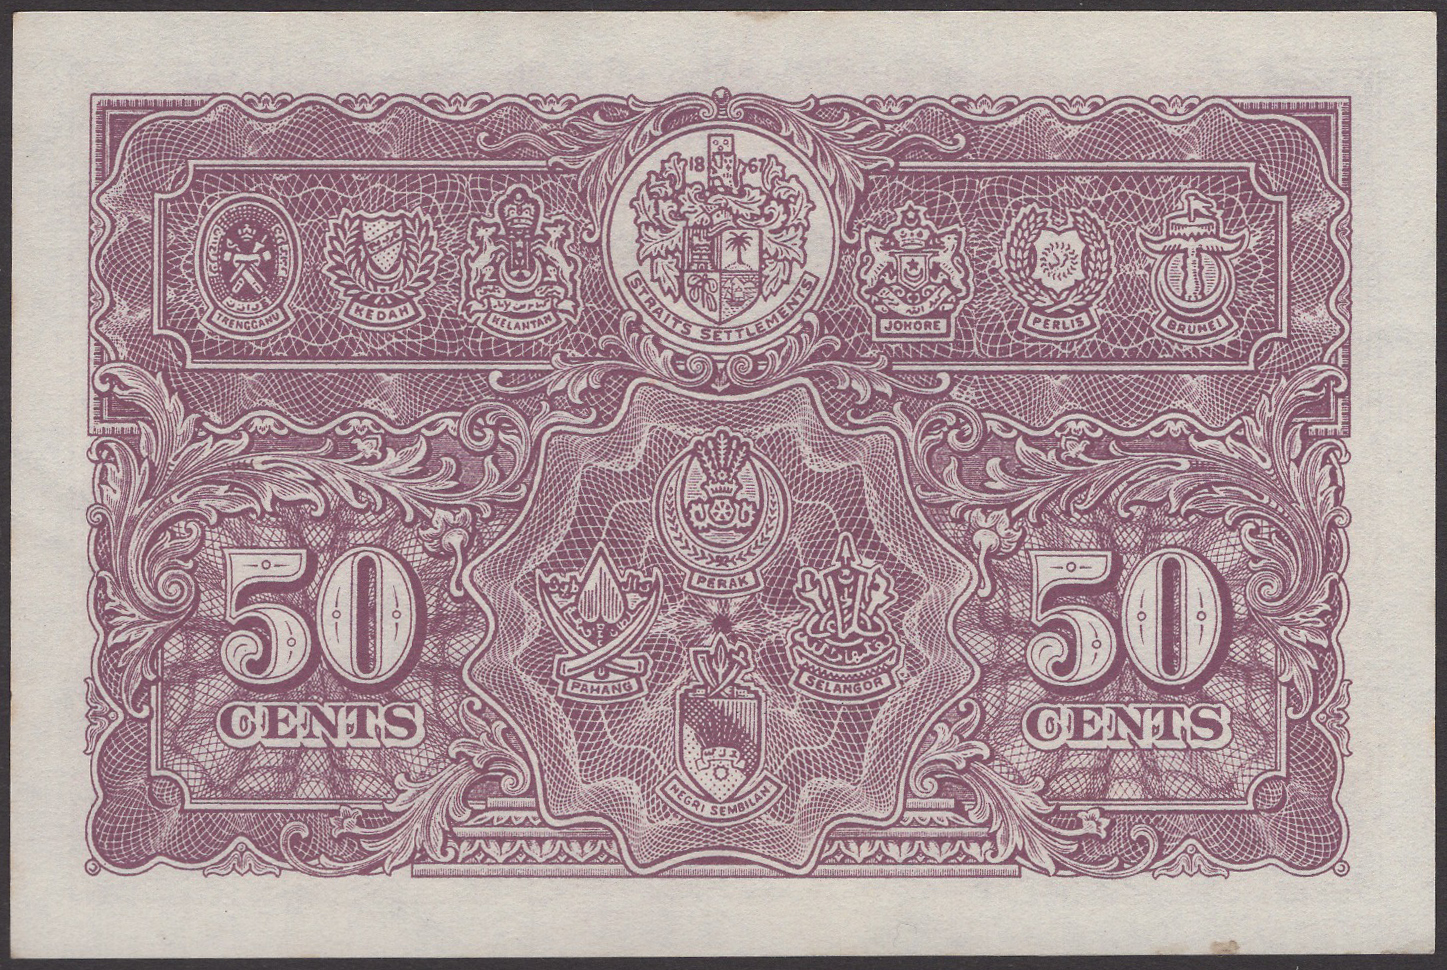 Board of Commissioners of Currency Malaya, 50 Cents, 1 July 1941, serial number A/25... - Image 2 of 2